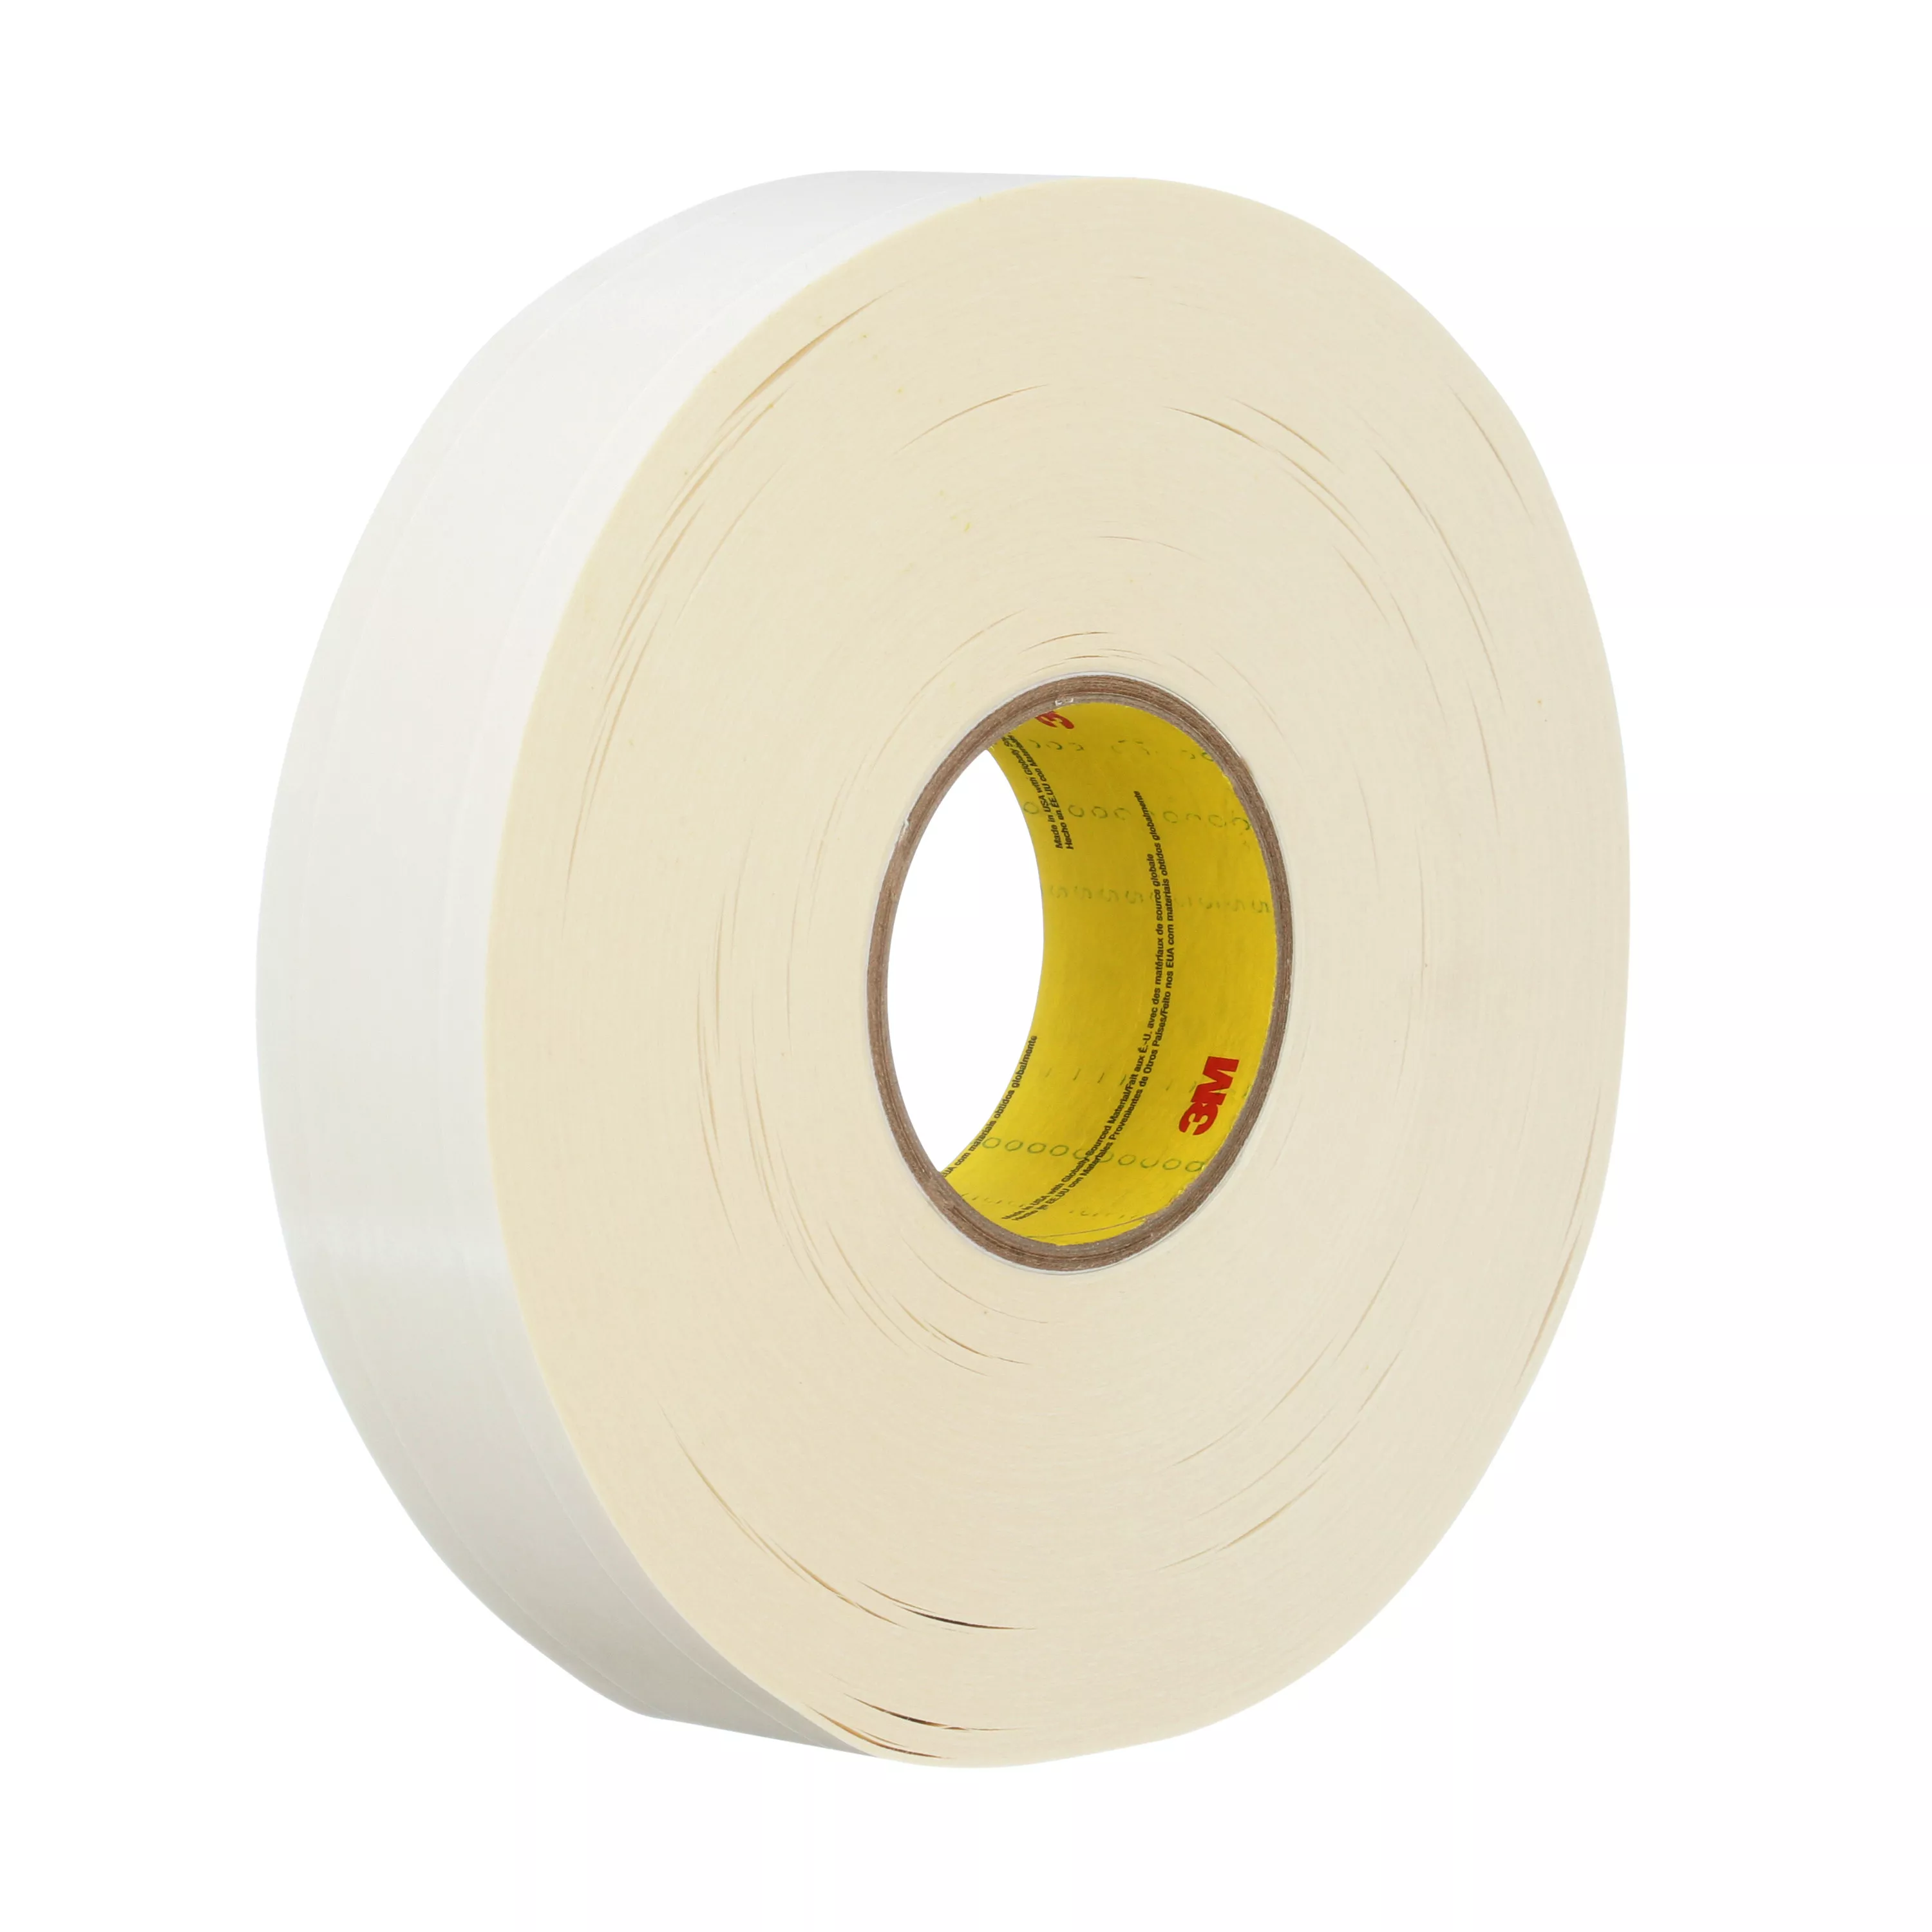 3M™ Repulpable Heavy Duty Double Coated Tape R3287, White, 72 mm x 55m,
5 mil, 12 Roll/Case, Split Liner